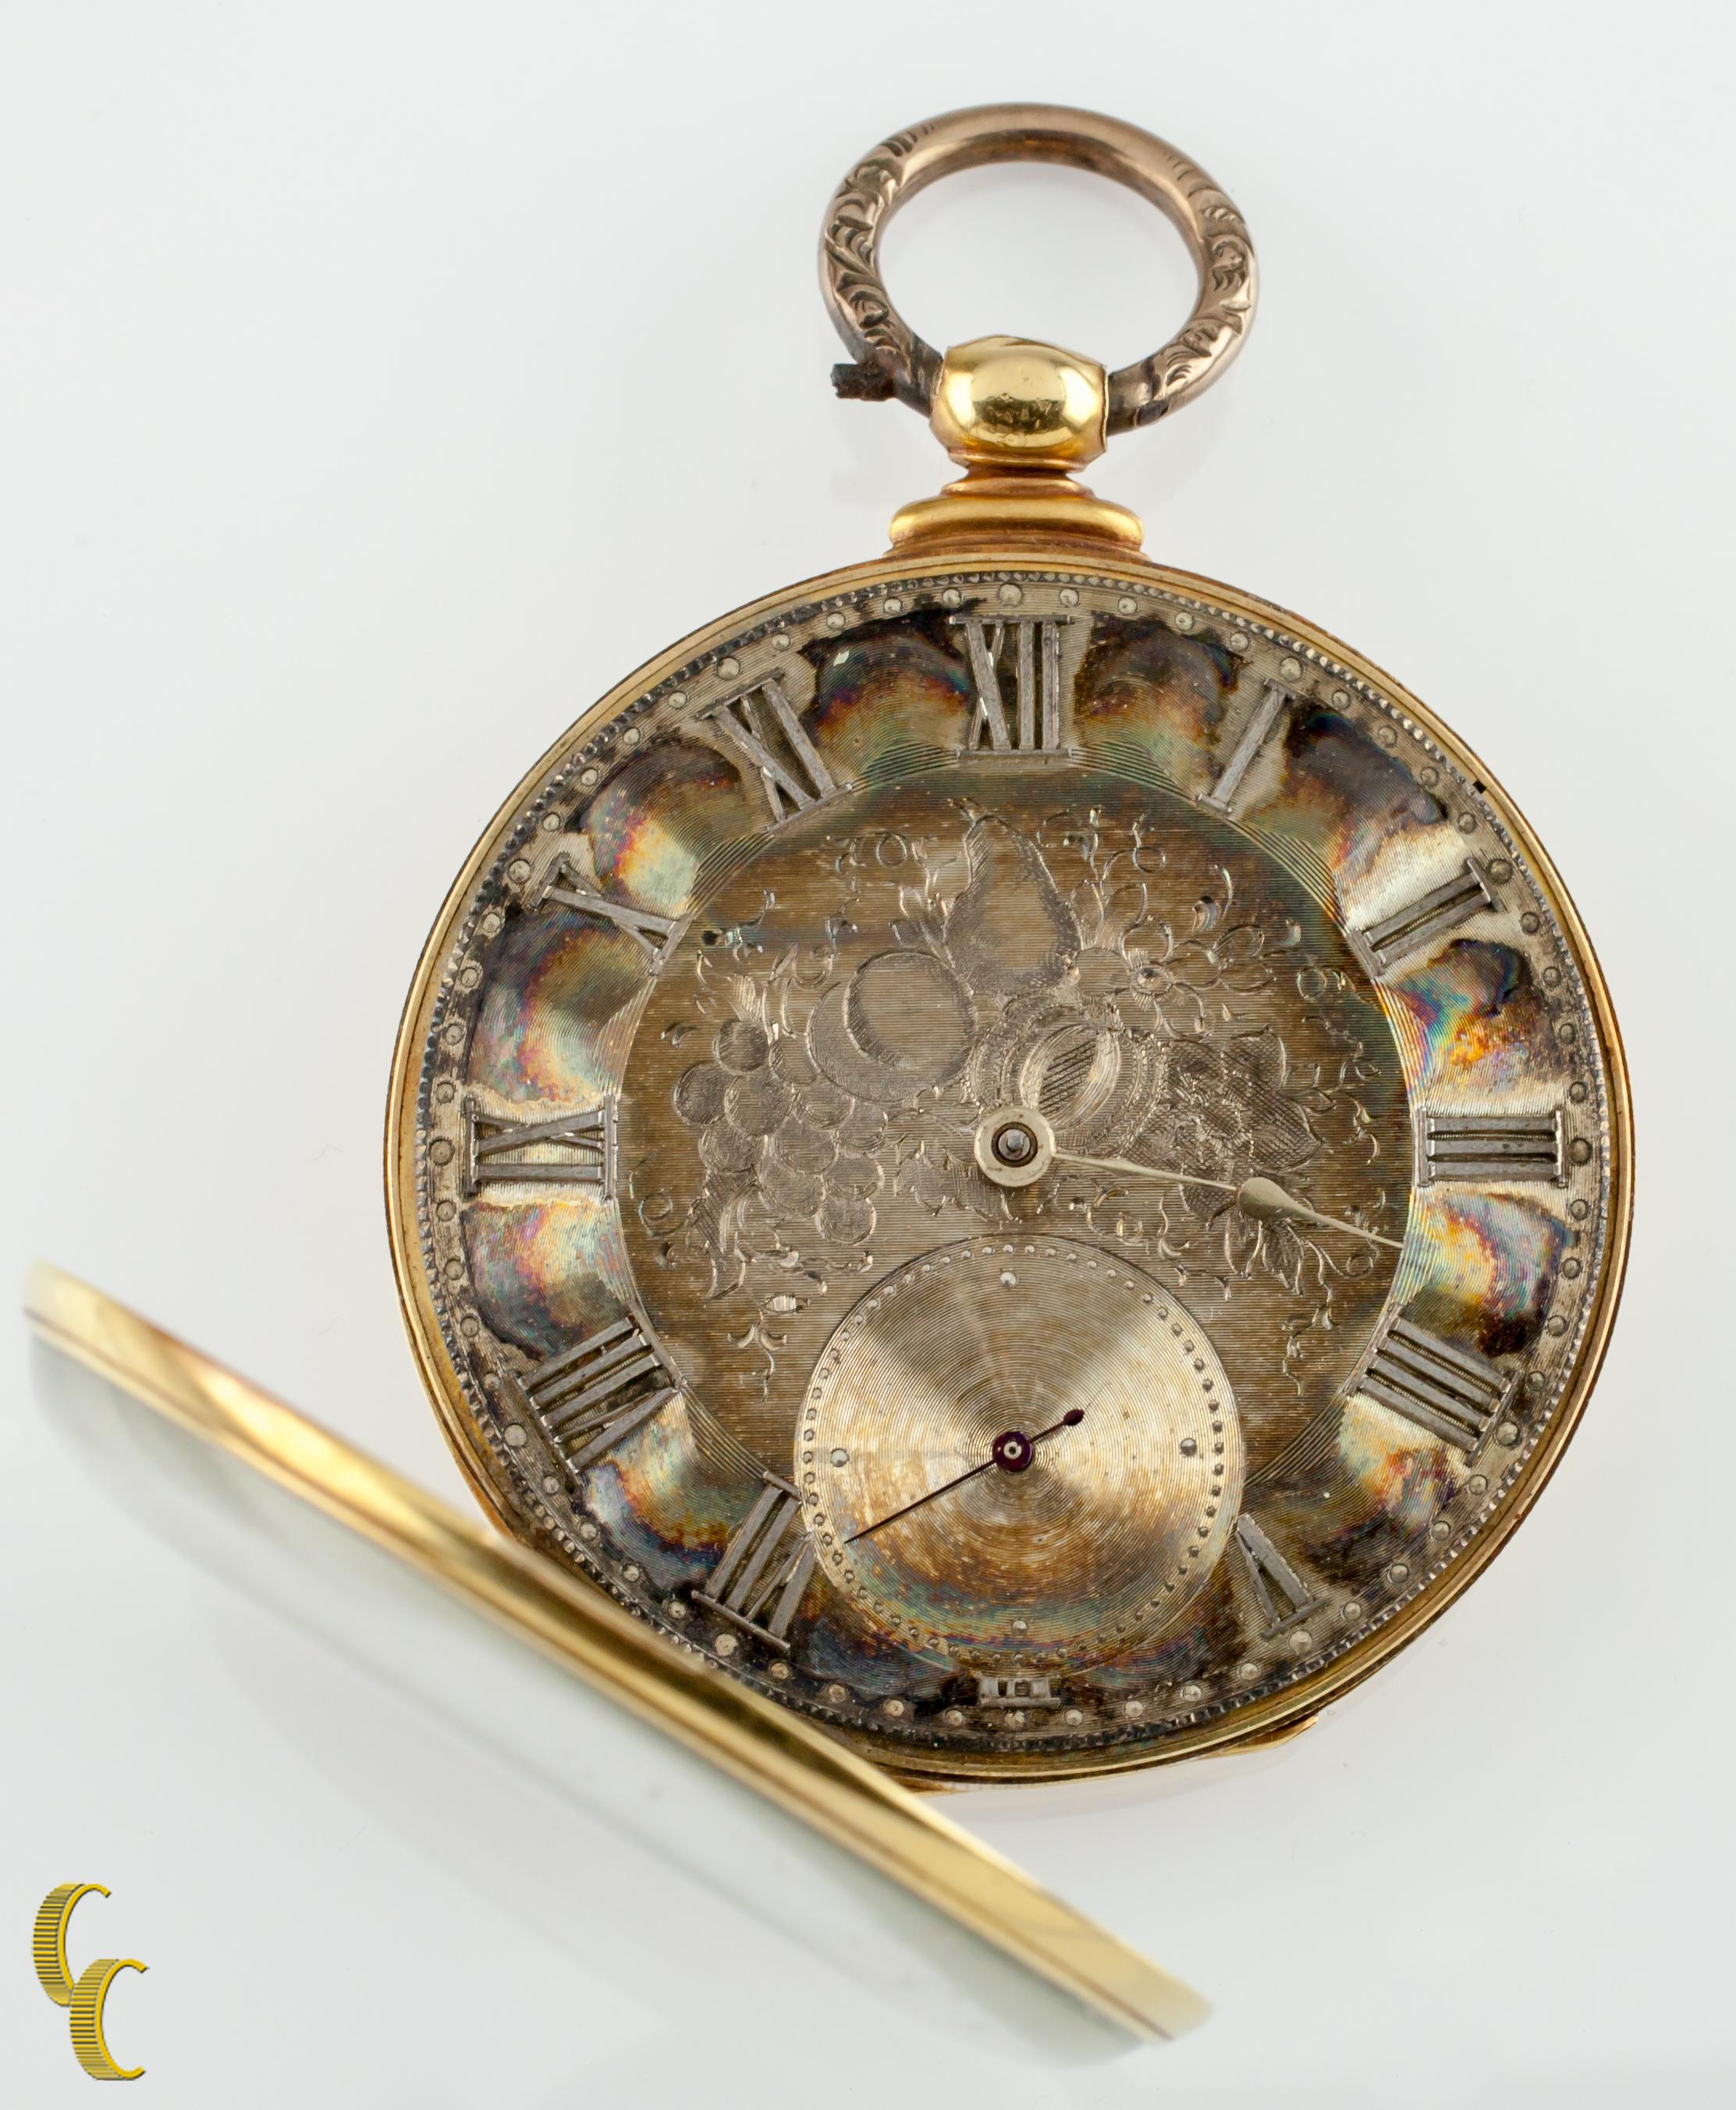 Beautiful Antique Thomas Cooper of London Pocket Watch w/ Amazing Machine-Etched Dial
Dial has acquired a rich rainbow colored patina over the years.
18k Yellow Solid Gold Case w/ Intricate Feather Design on Reverse of Case
Silver Roman